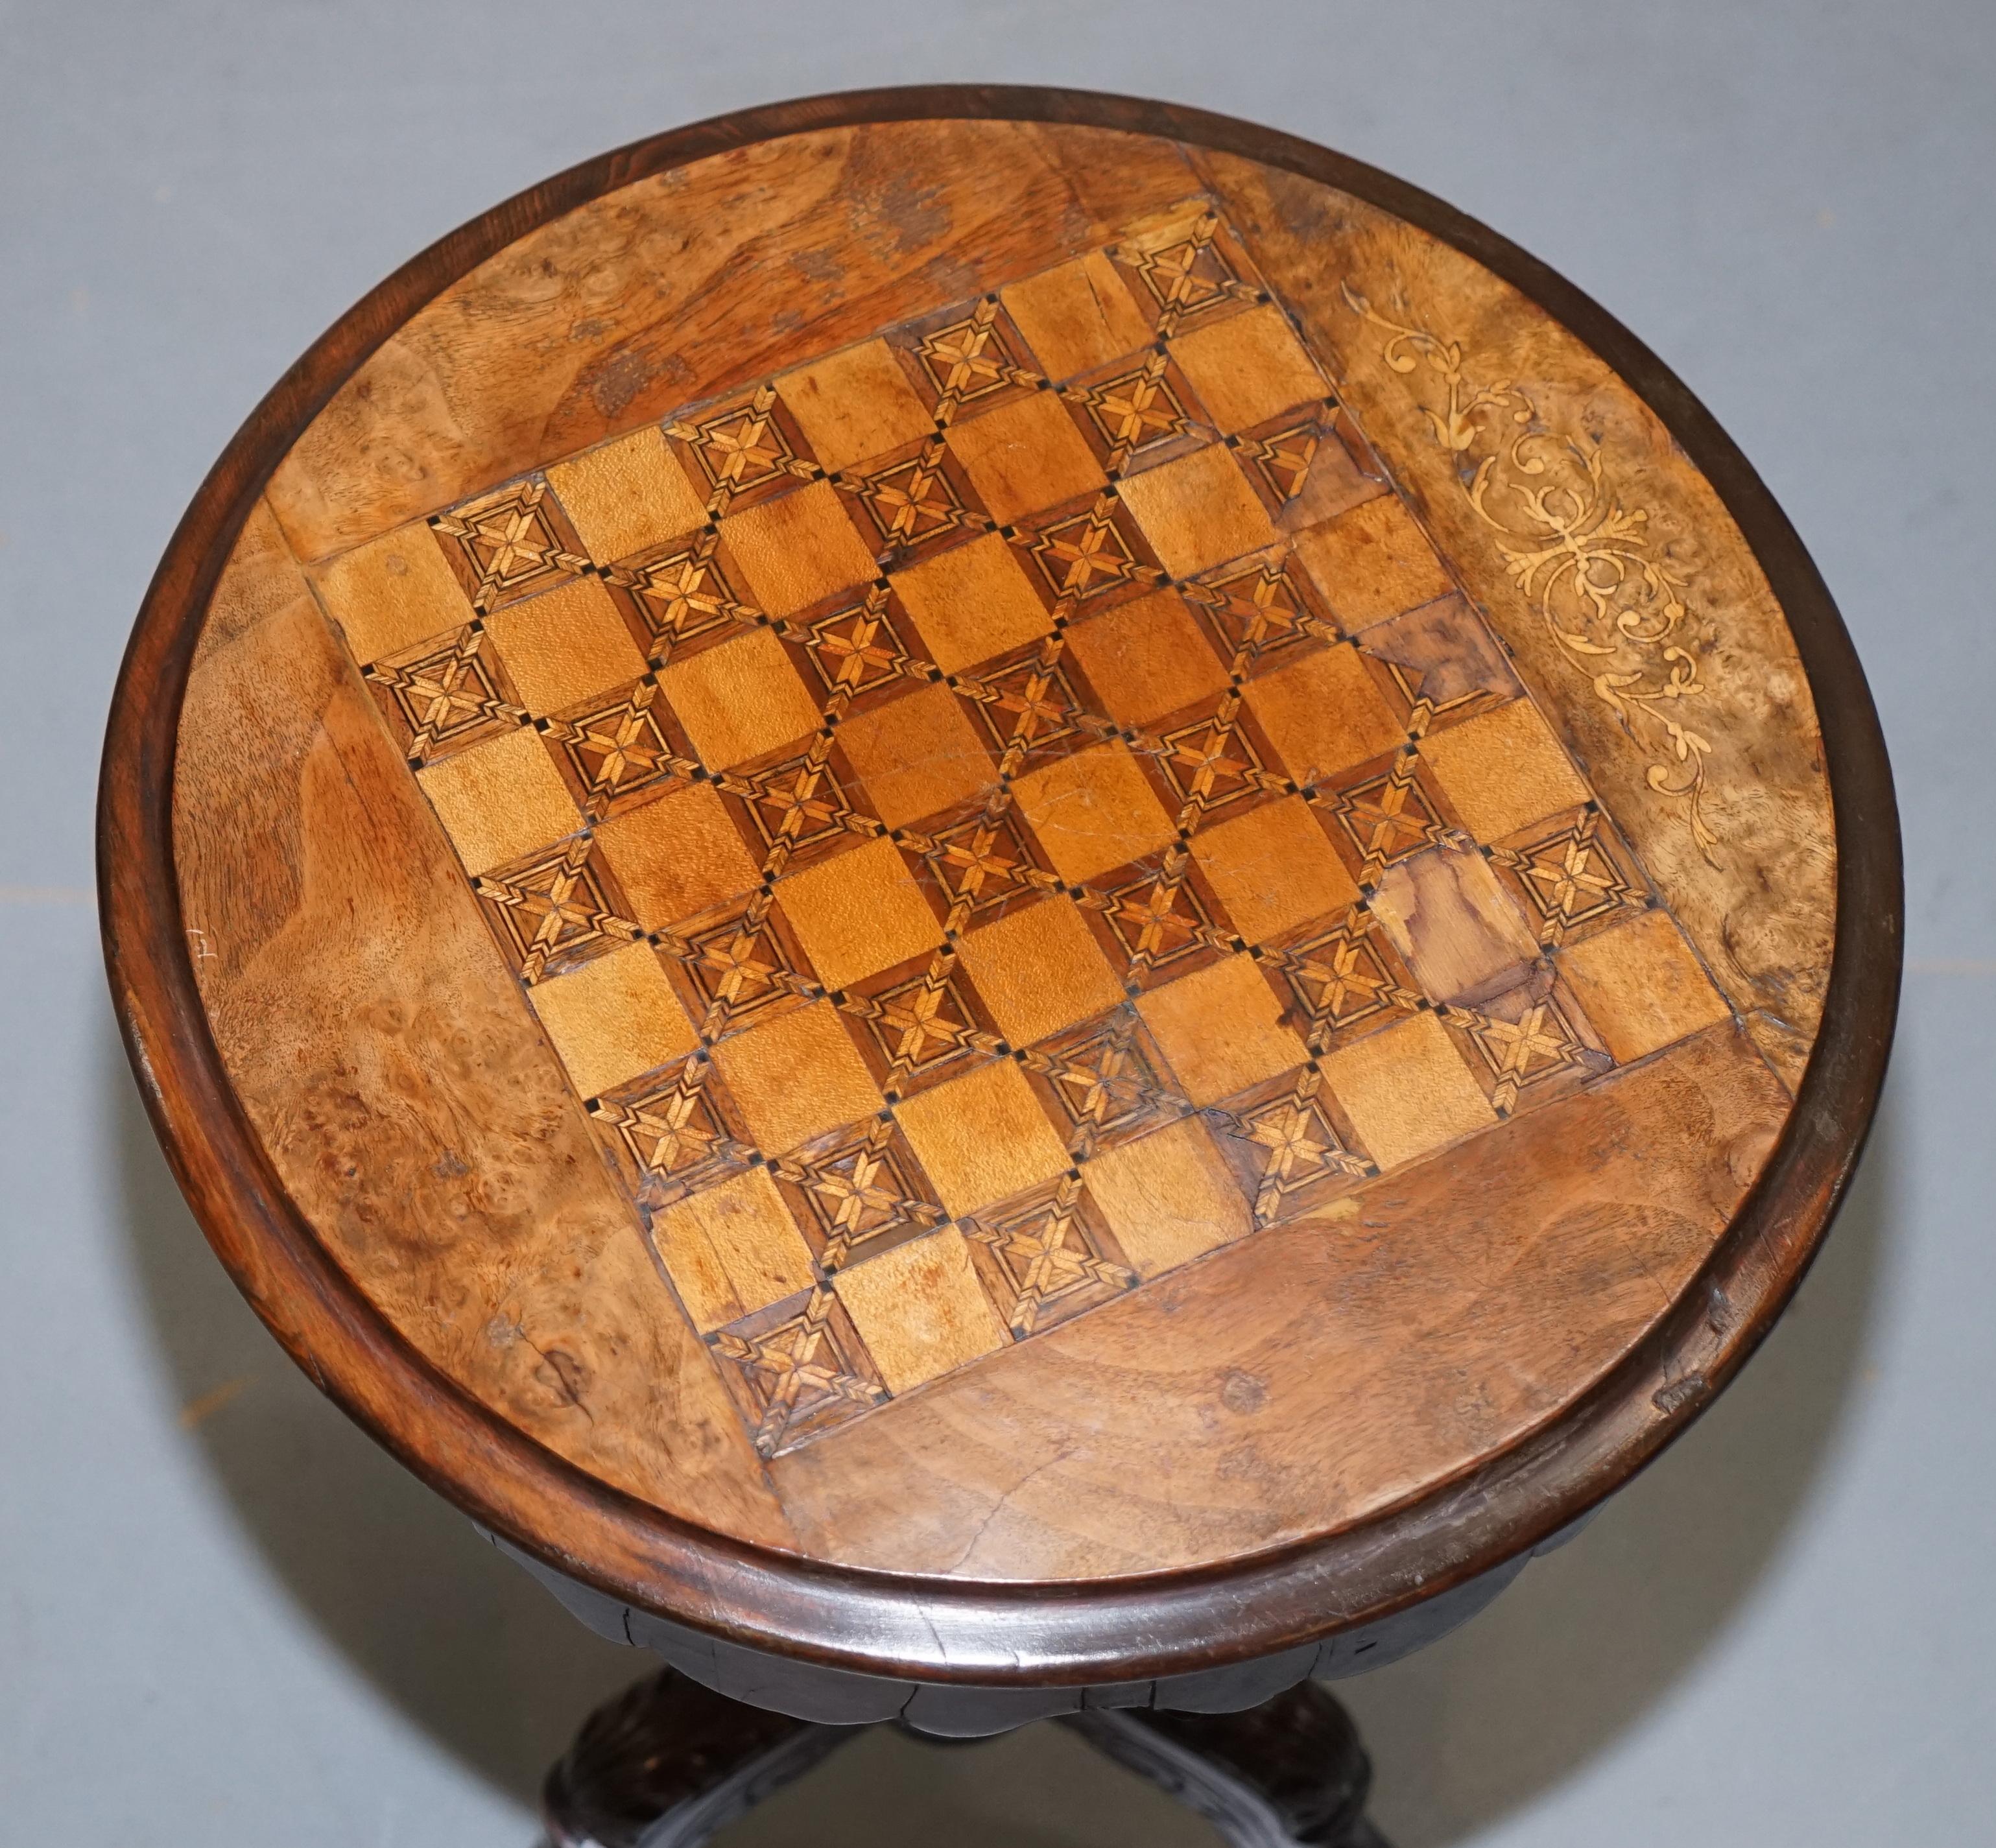 We are delighted to this lovely hand made Victorian Chess table sewing or work box in Burr Walnut

A very good looking and well made piece, the octagonal top is feature, usually these has much simpler formations, the burr walnut is nicely cur and